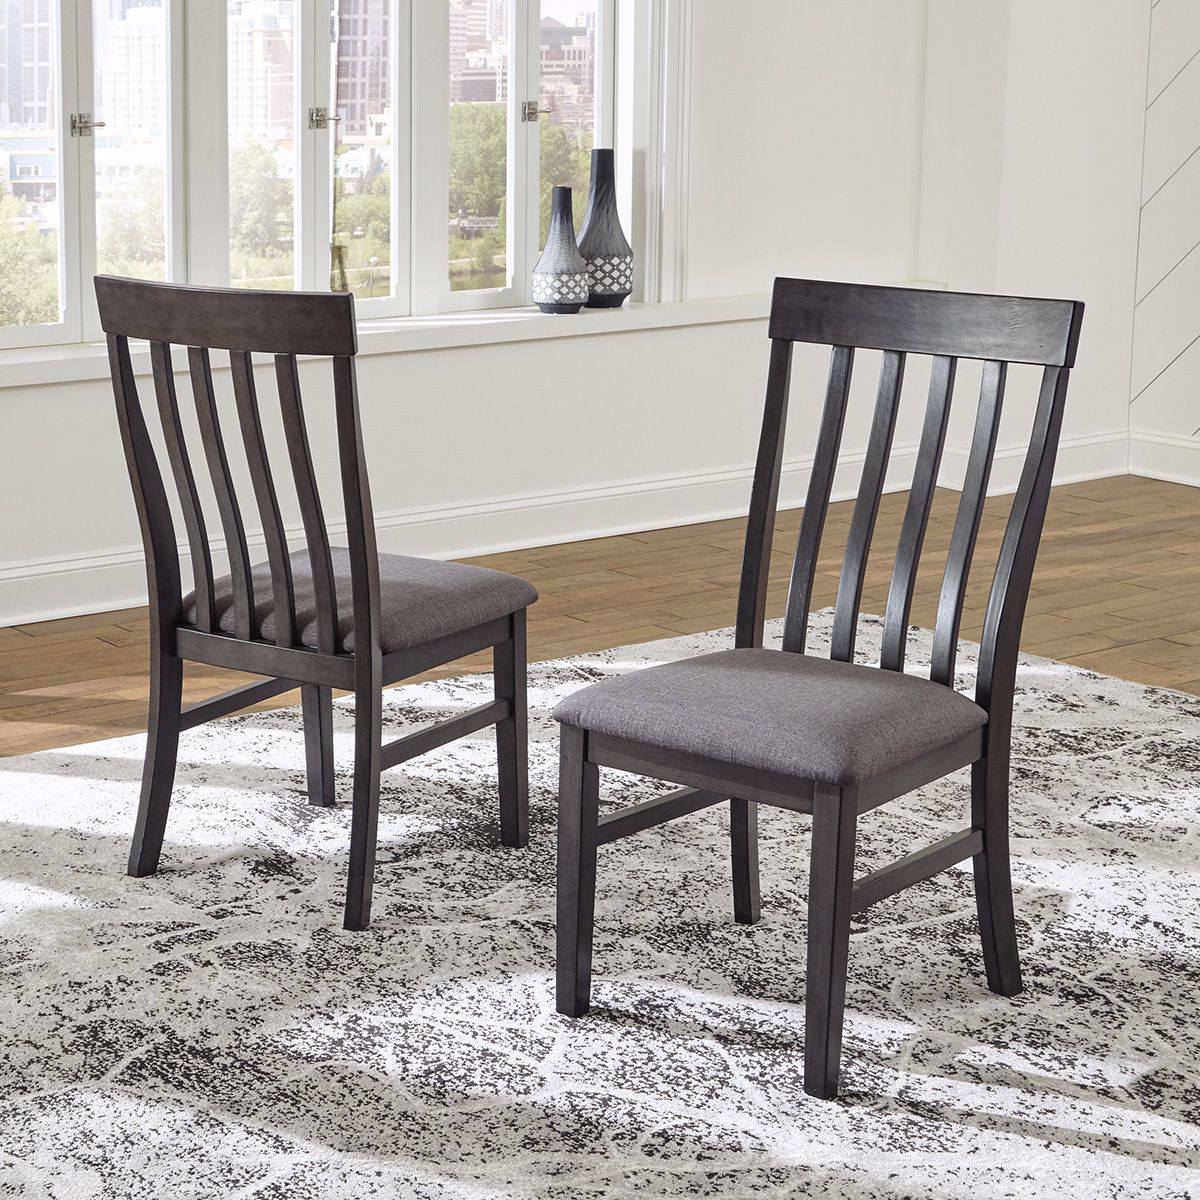 Picture of Meredith Dining Chair